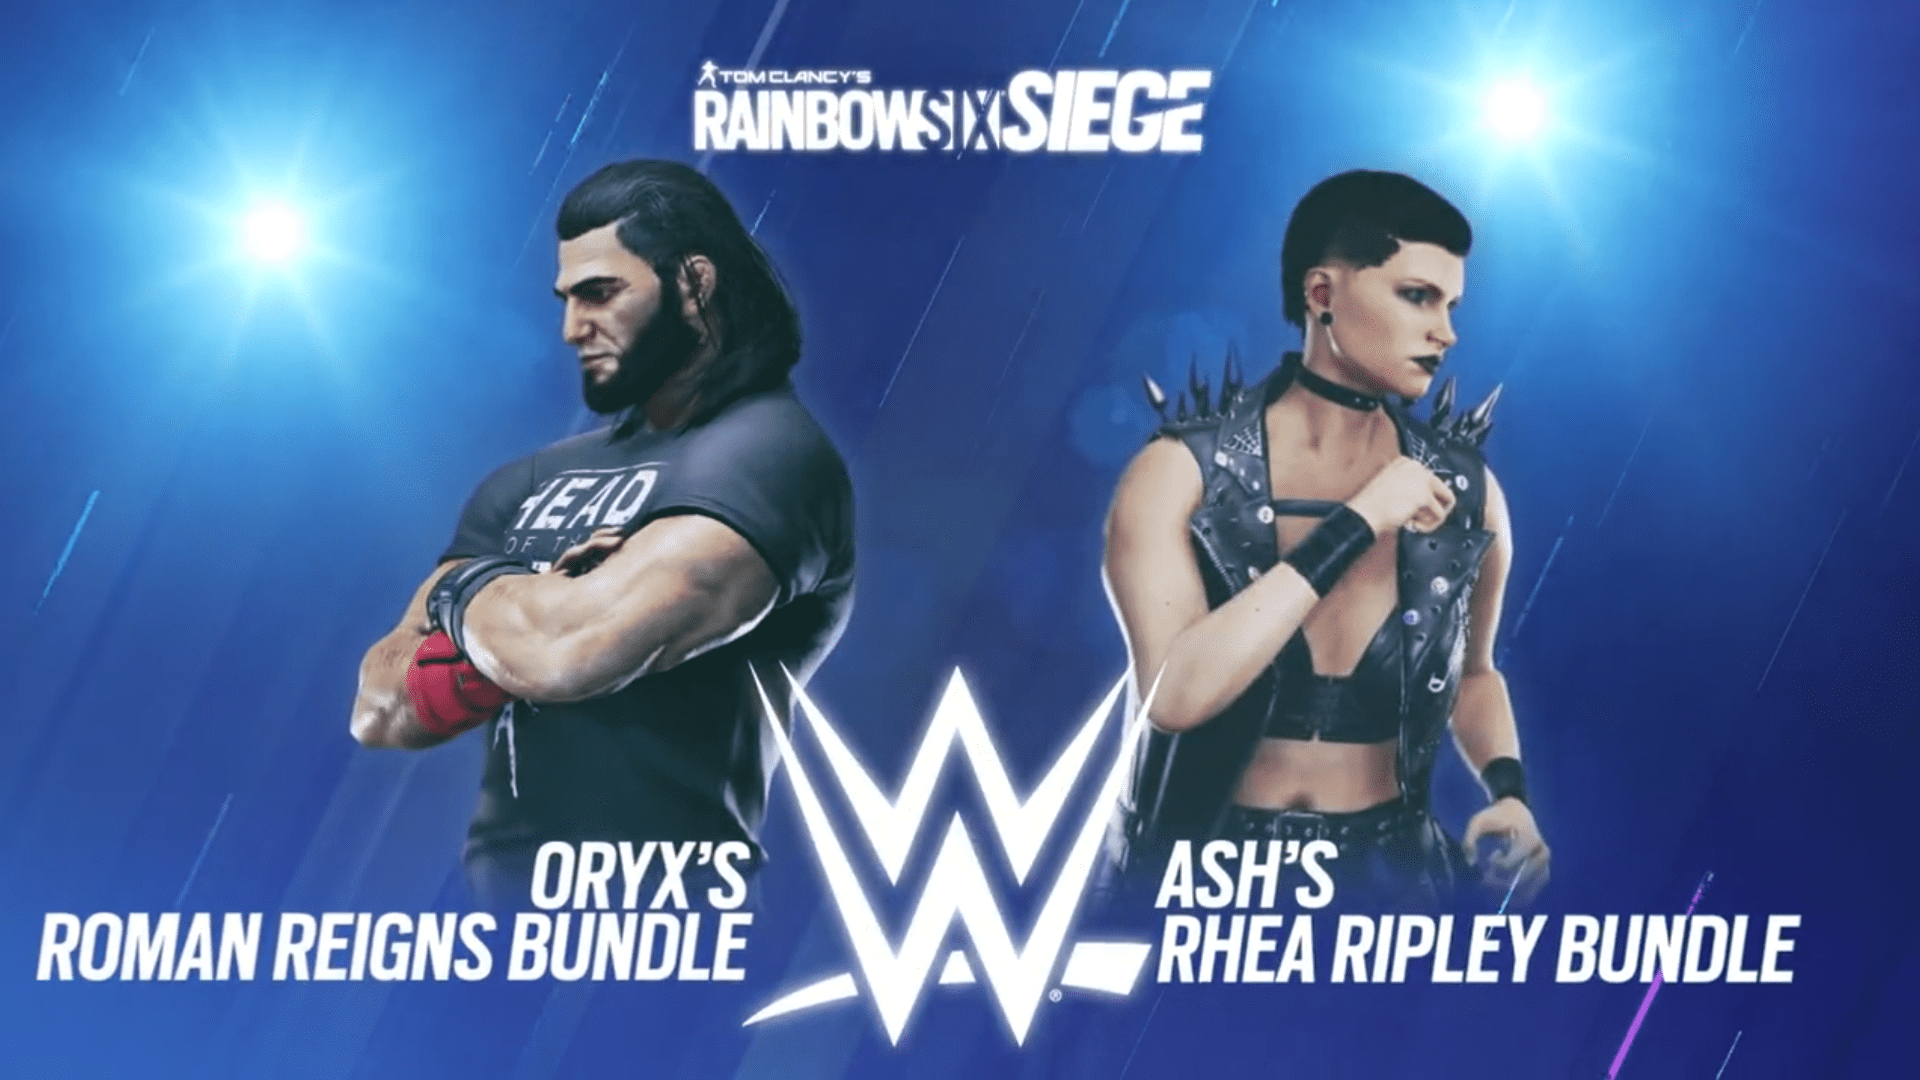 Rainbow Six Siege to release new WWE bundles for Ash and Oryx — SiegeGG